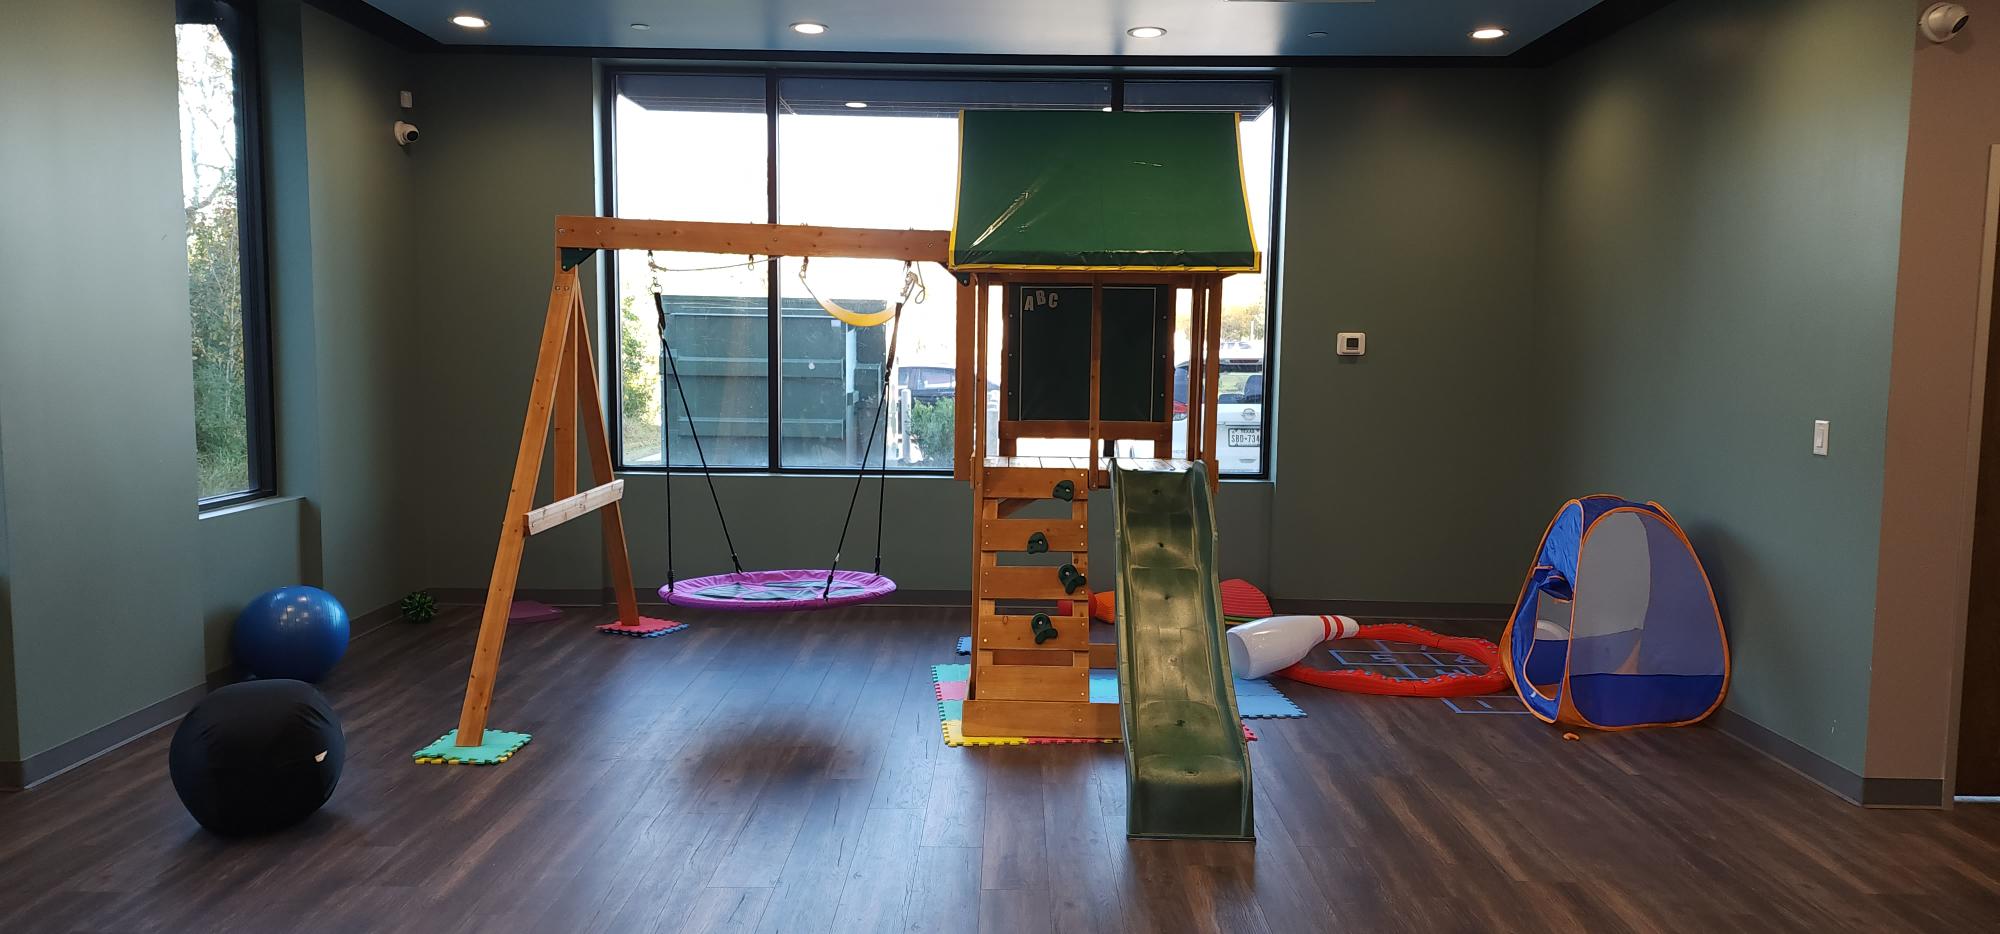 ABA Therapy Near You | Play Center